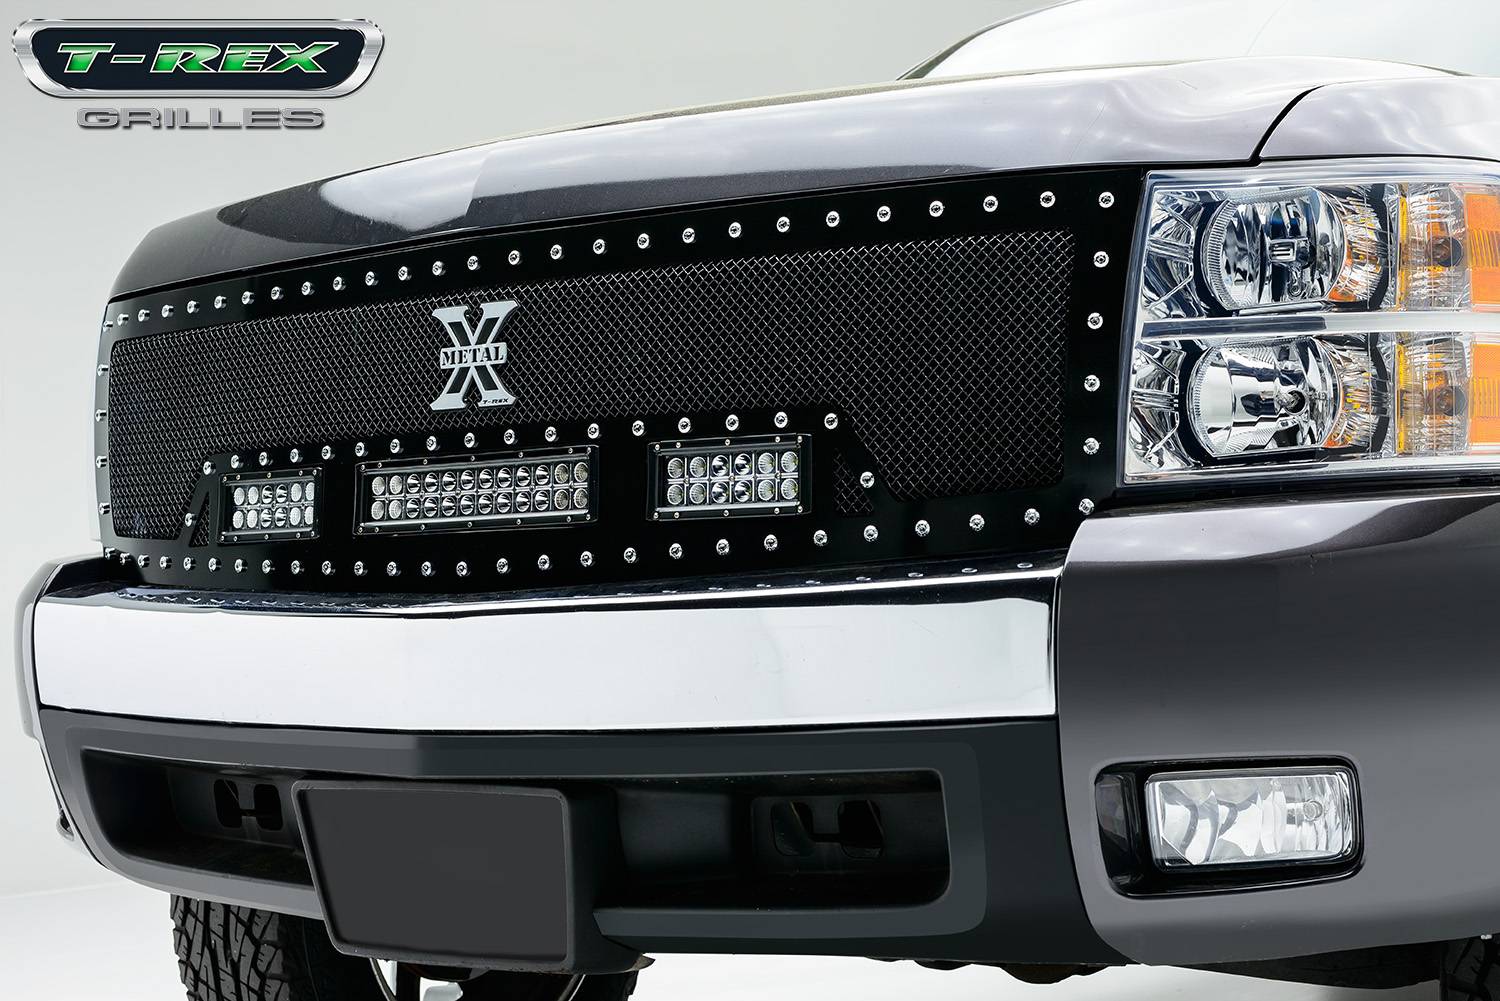 T-REX GRILLES - 2007-2013 Silverado 1500 Torch Grille, Black, 1 Pc, Replacement, Chrome Studs with (2) 6" and (1) 12" LEDs - Part # 6311111